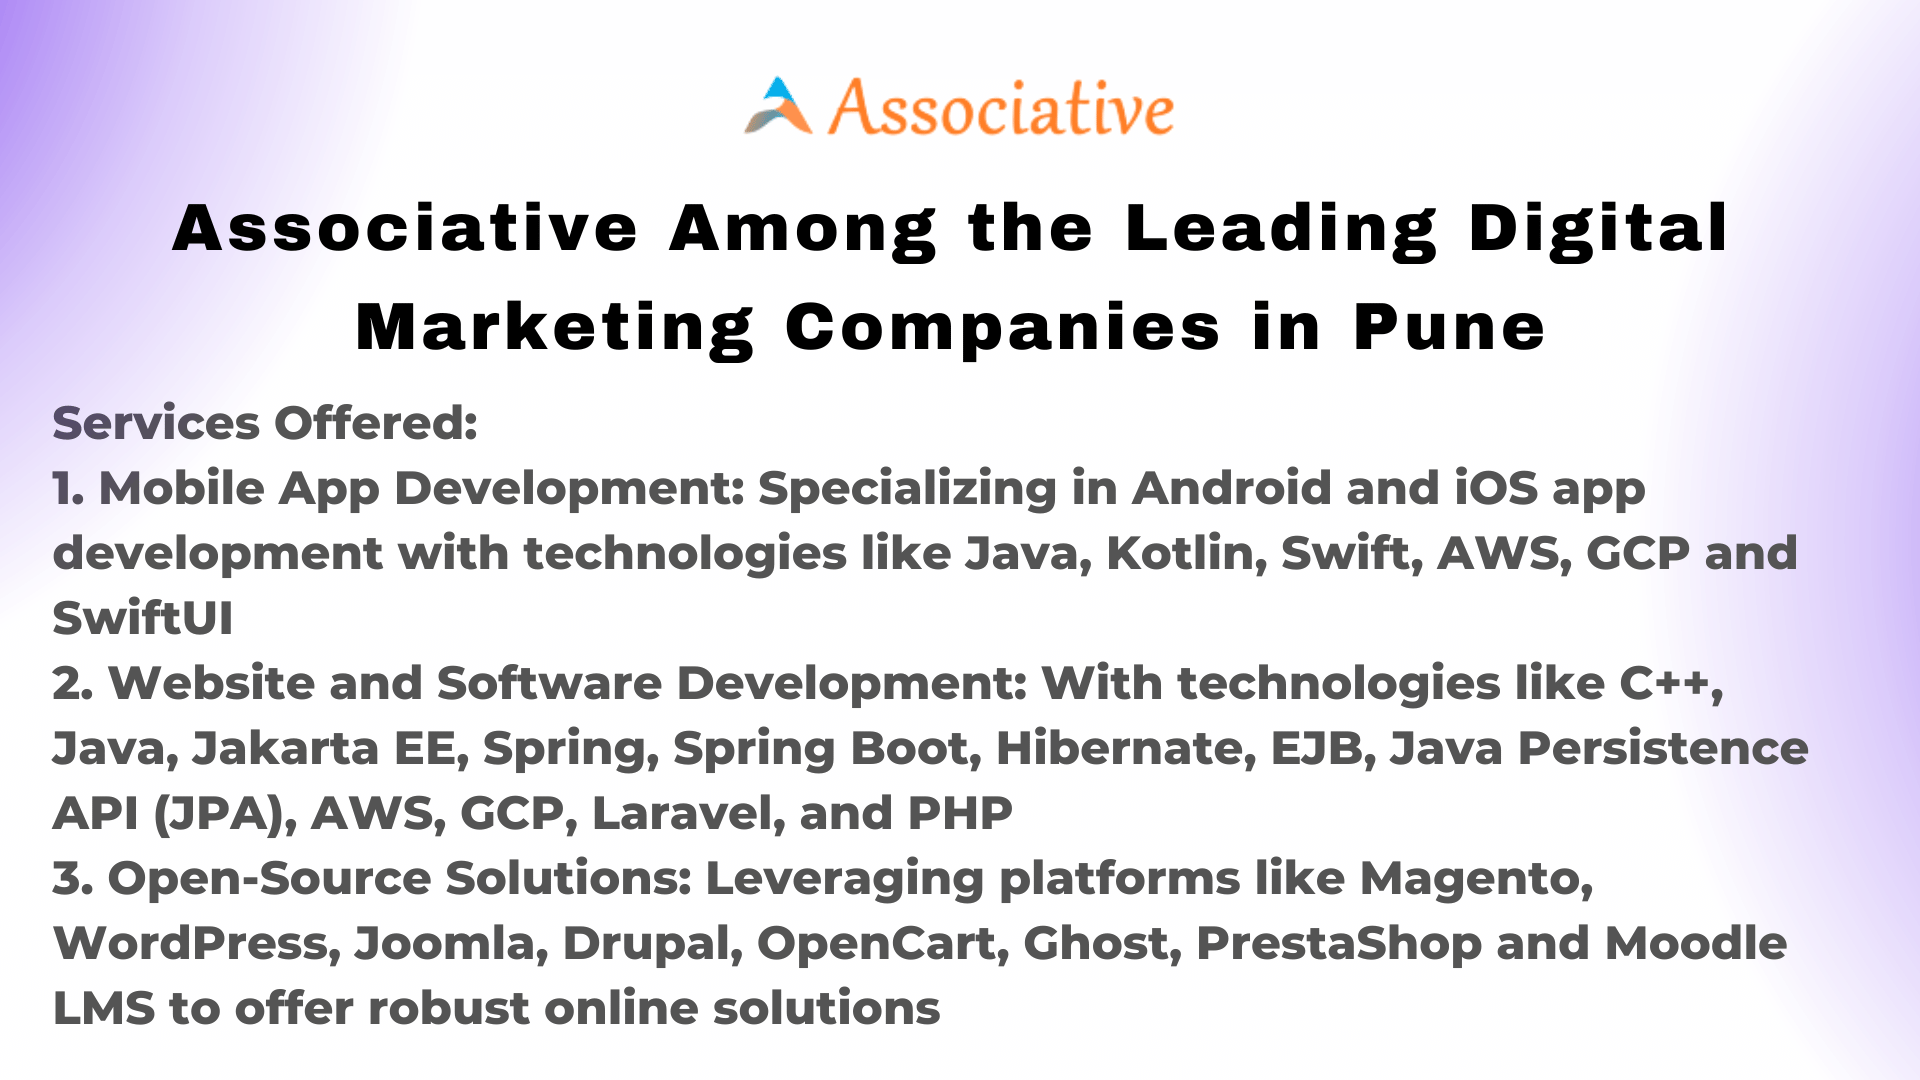 Associative Among the Leading Digital Marketing Companies in Pune